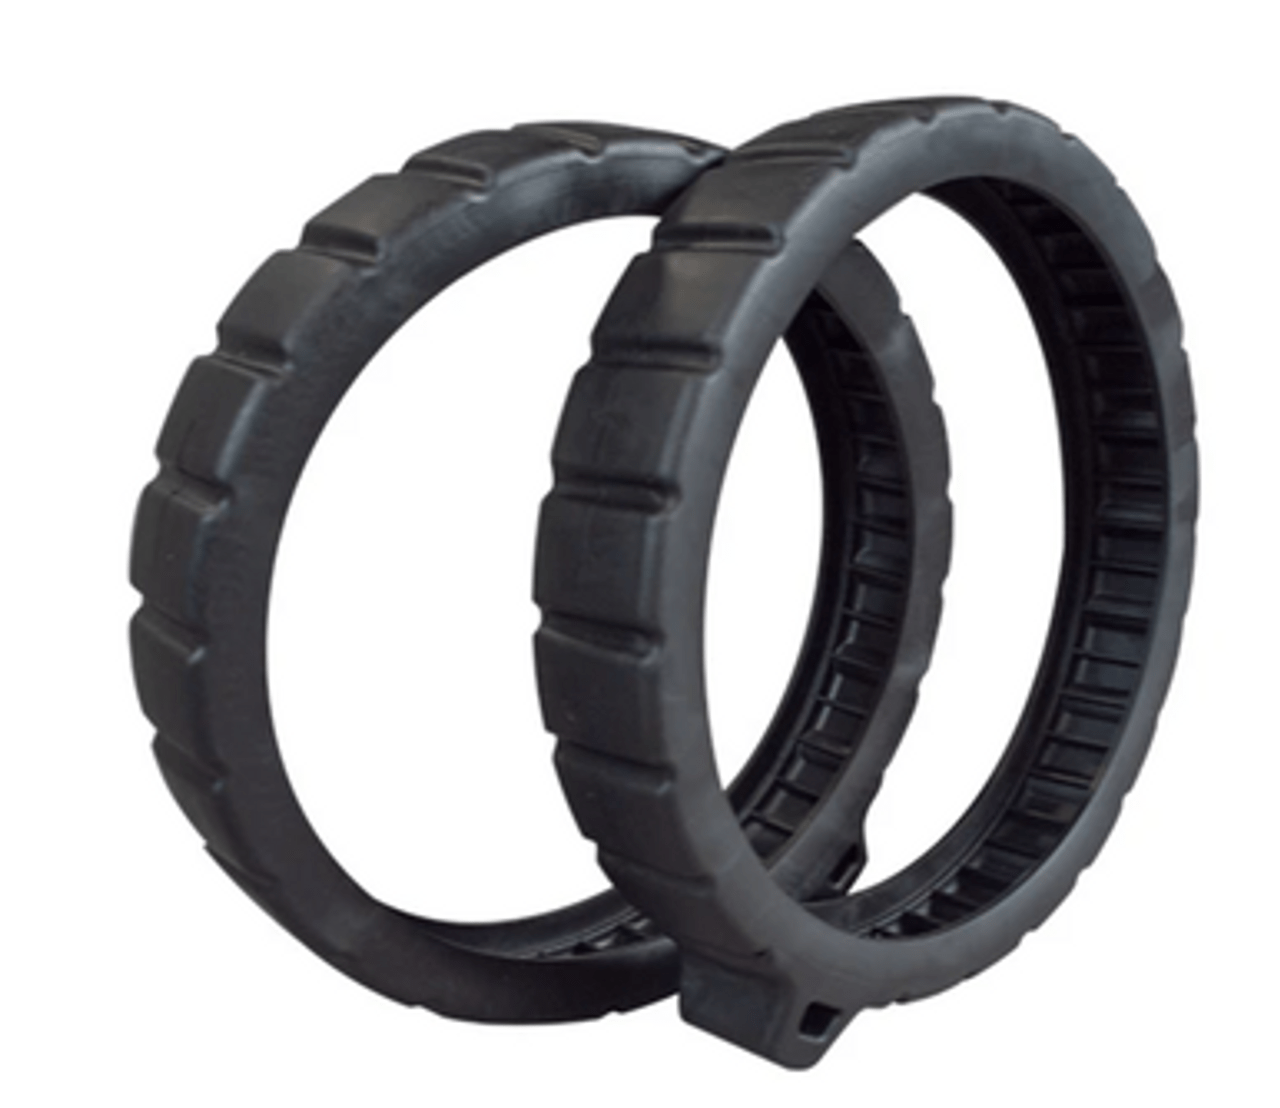 Pentair Large Hump Tire for Rebel Cleaner 360326 - Cleaner Parts - img-1